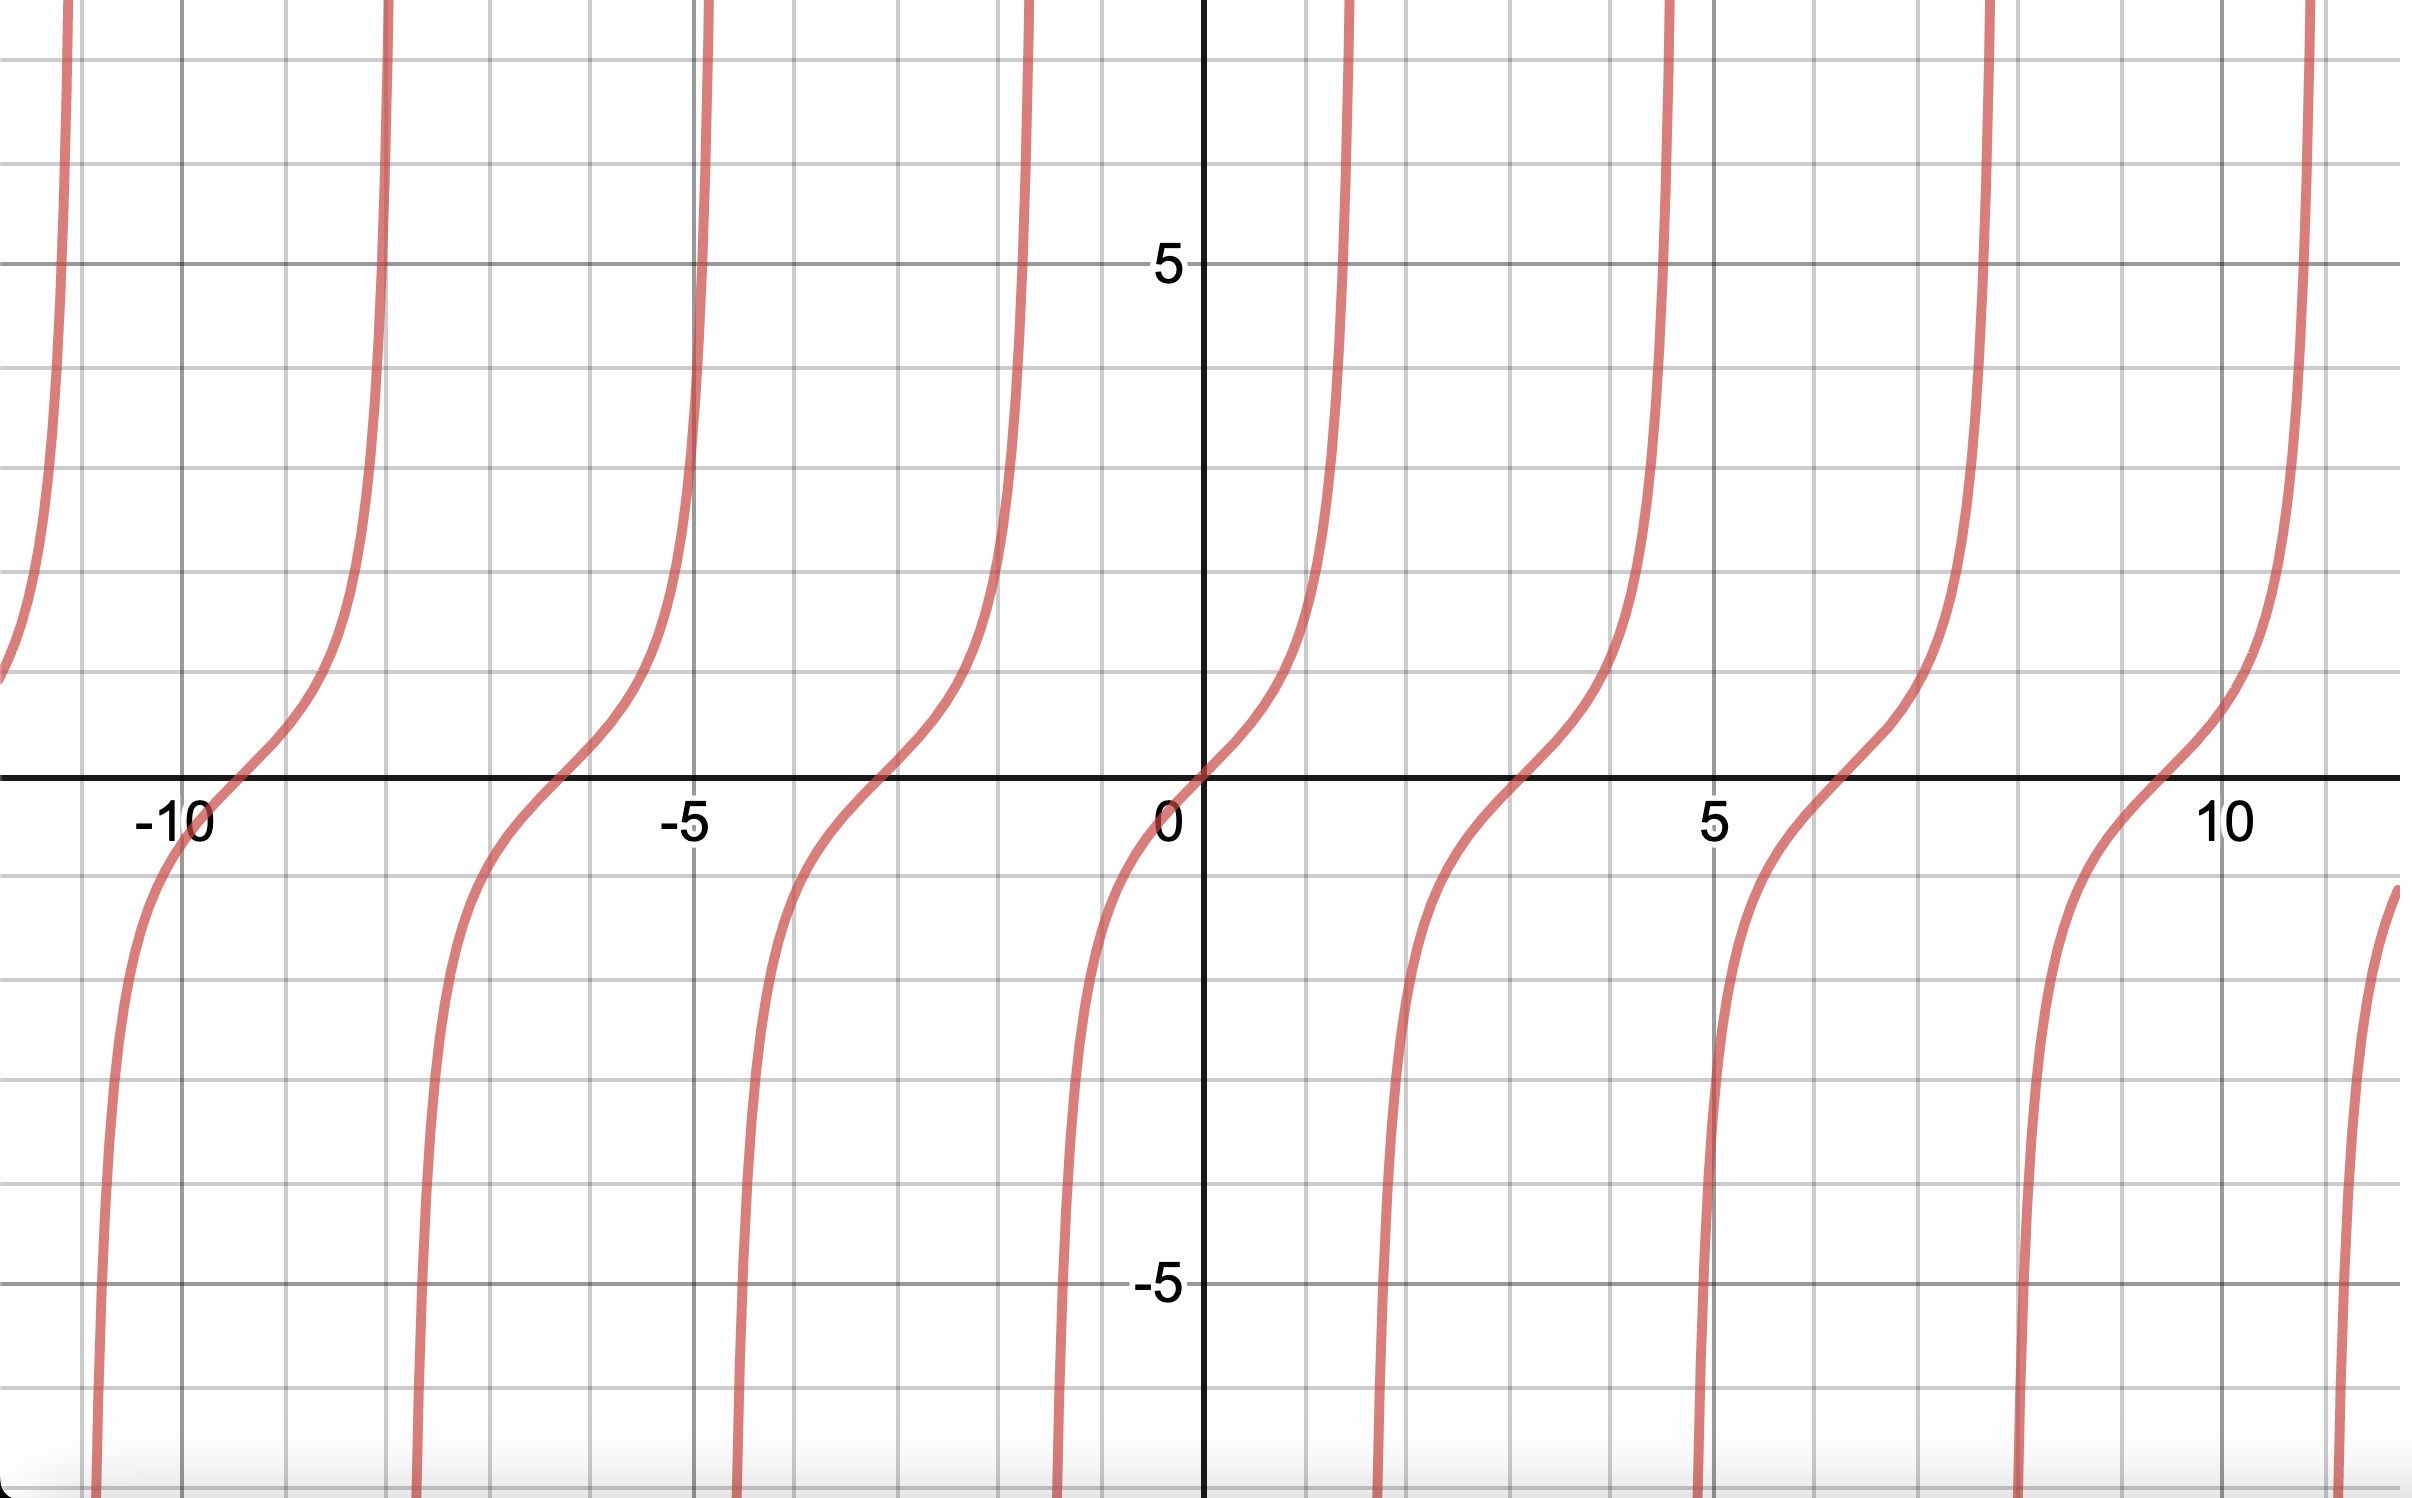 Graphing Calculator Pro·